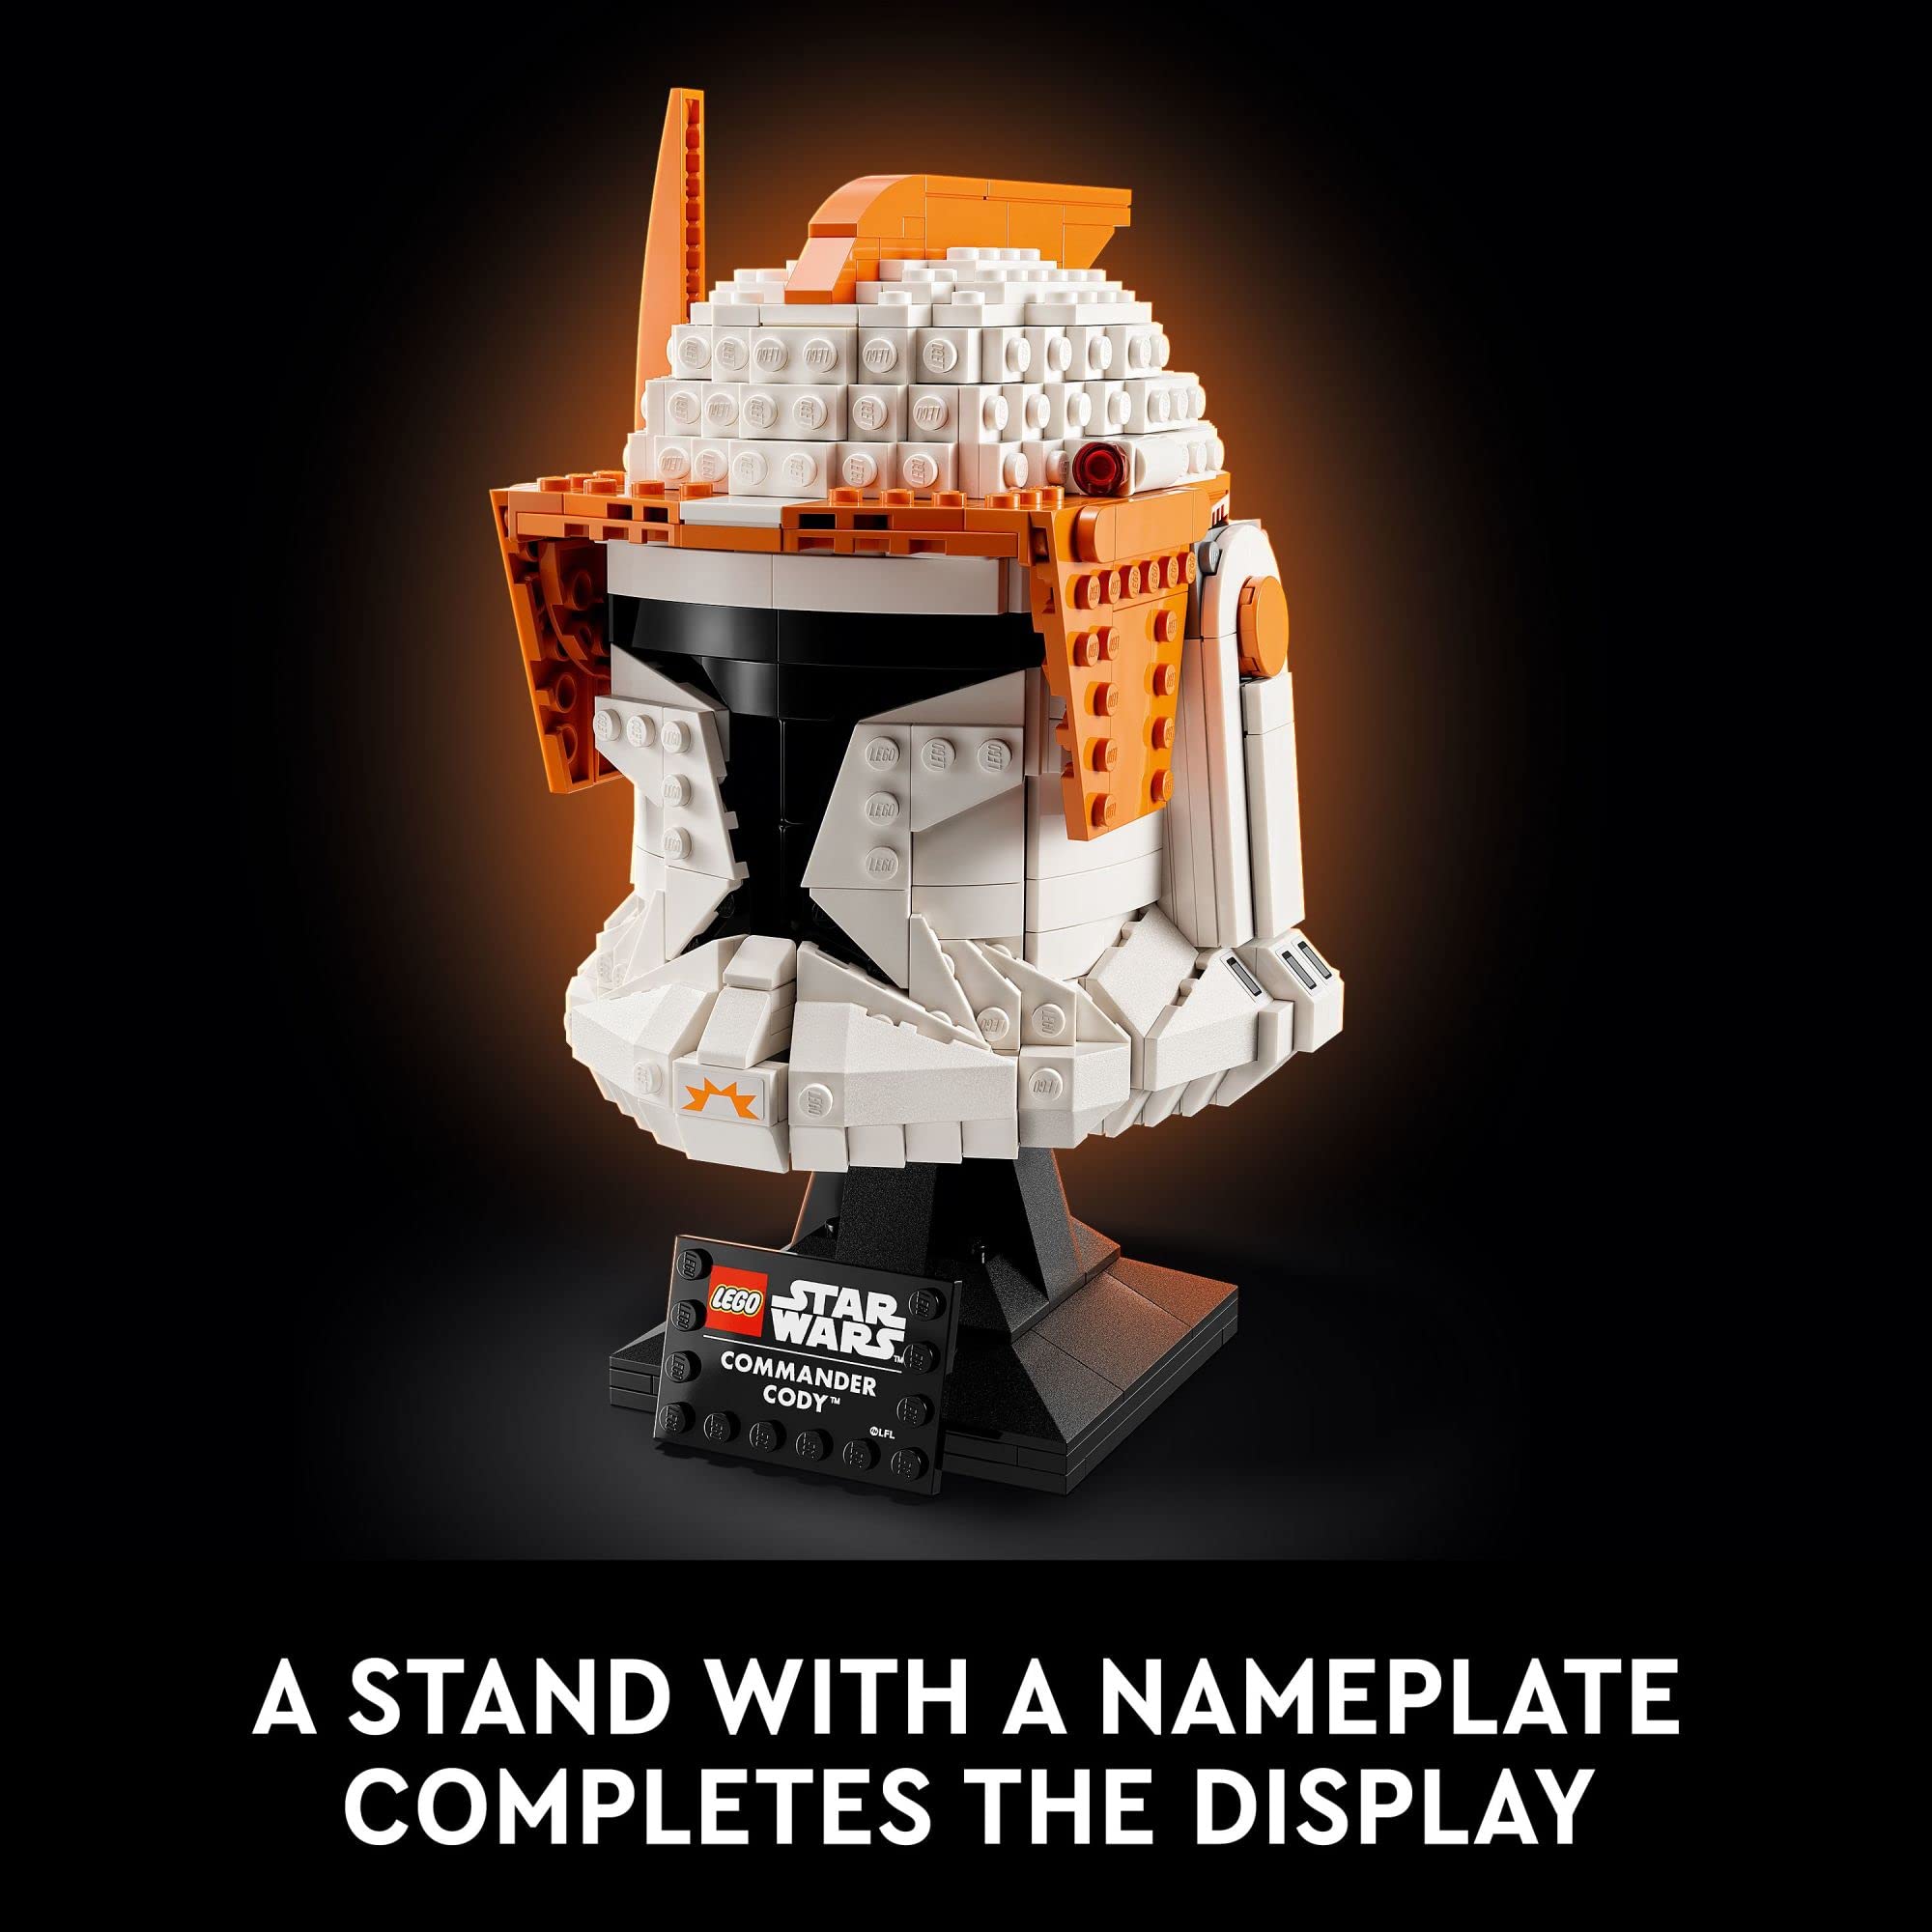 LEGO Star Wars Clone Commander Cody Helmet 75350 Collectible Building Set - Featuring Authentic Details, Office Decor Display Model for Adults, The Clone Wars Collection Memorabilia and Gift Idea